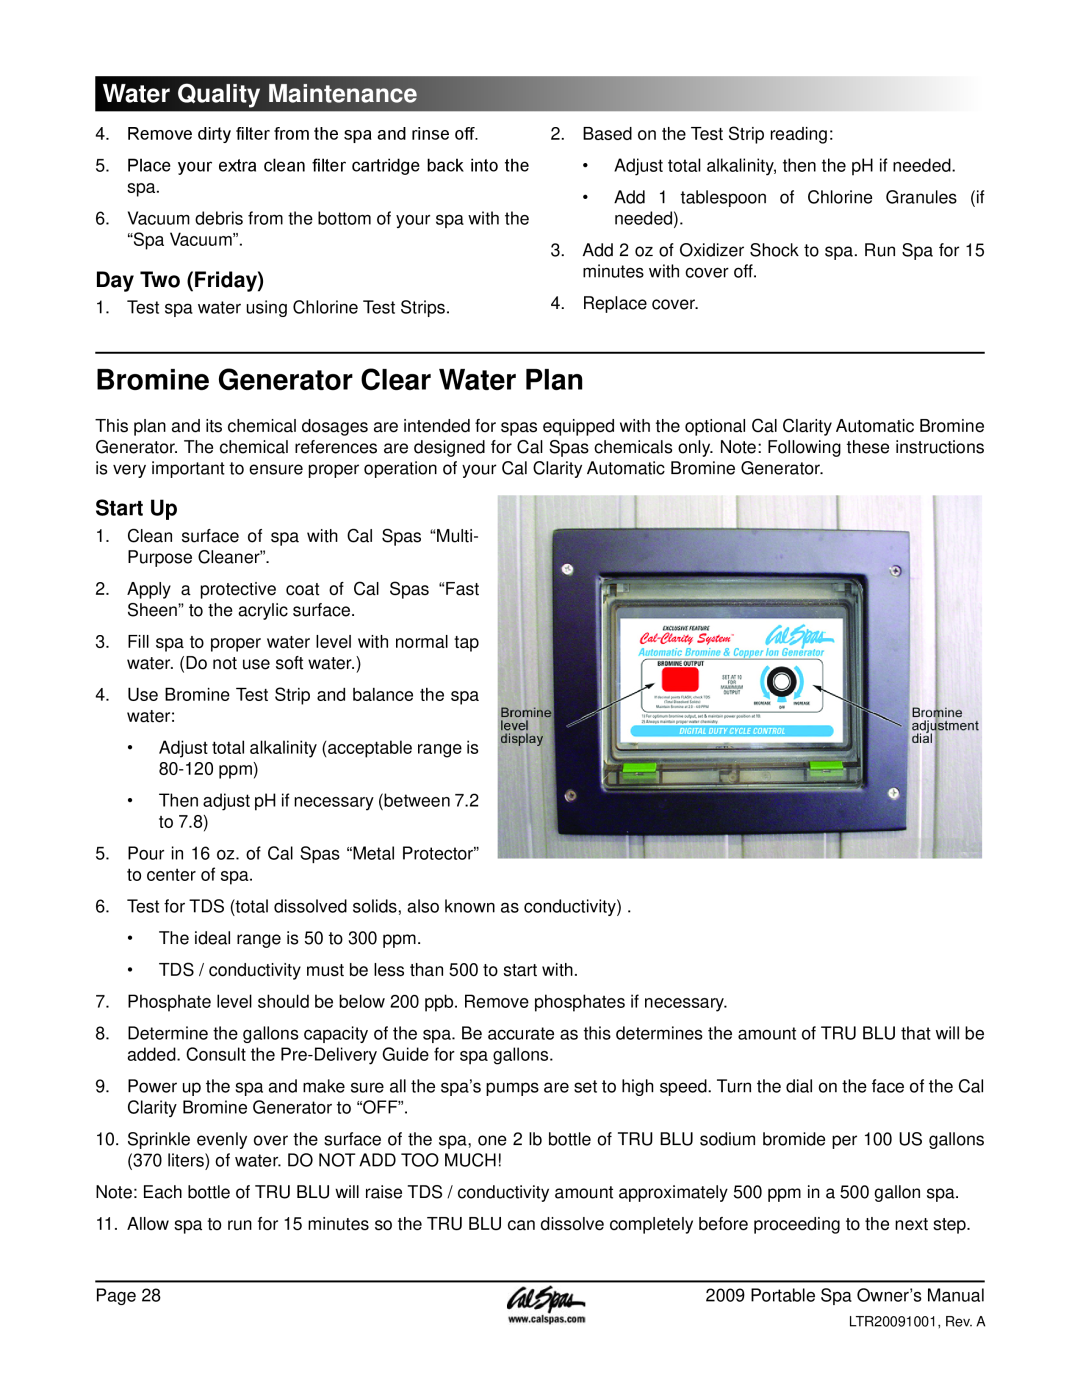 Cal Spas Portable Spas manual Bromine Generator Clear Water Plan, Day Two Friday, Water Quality Maintenance, Start Up 